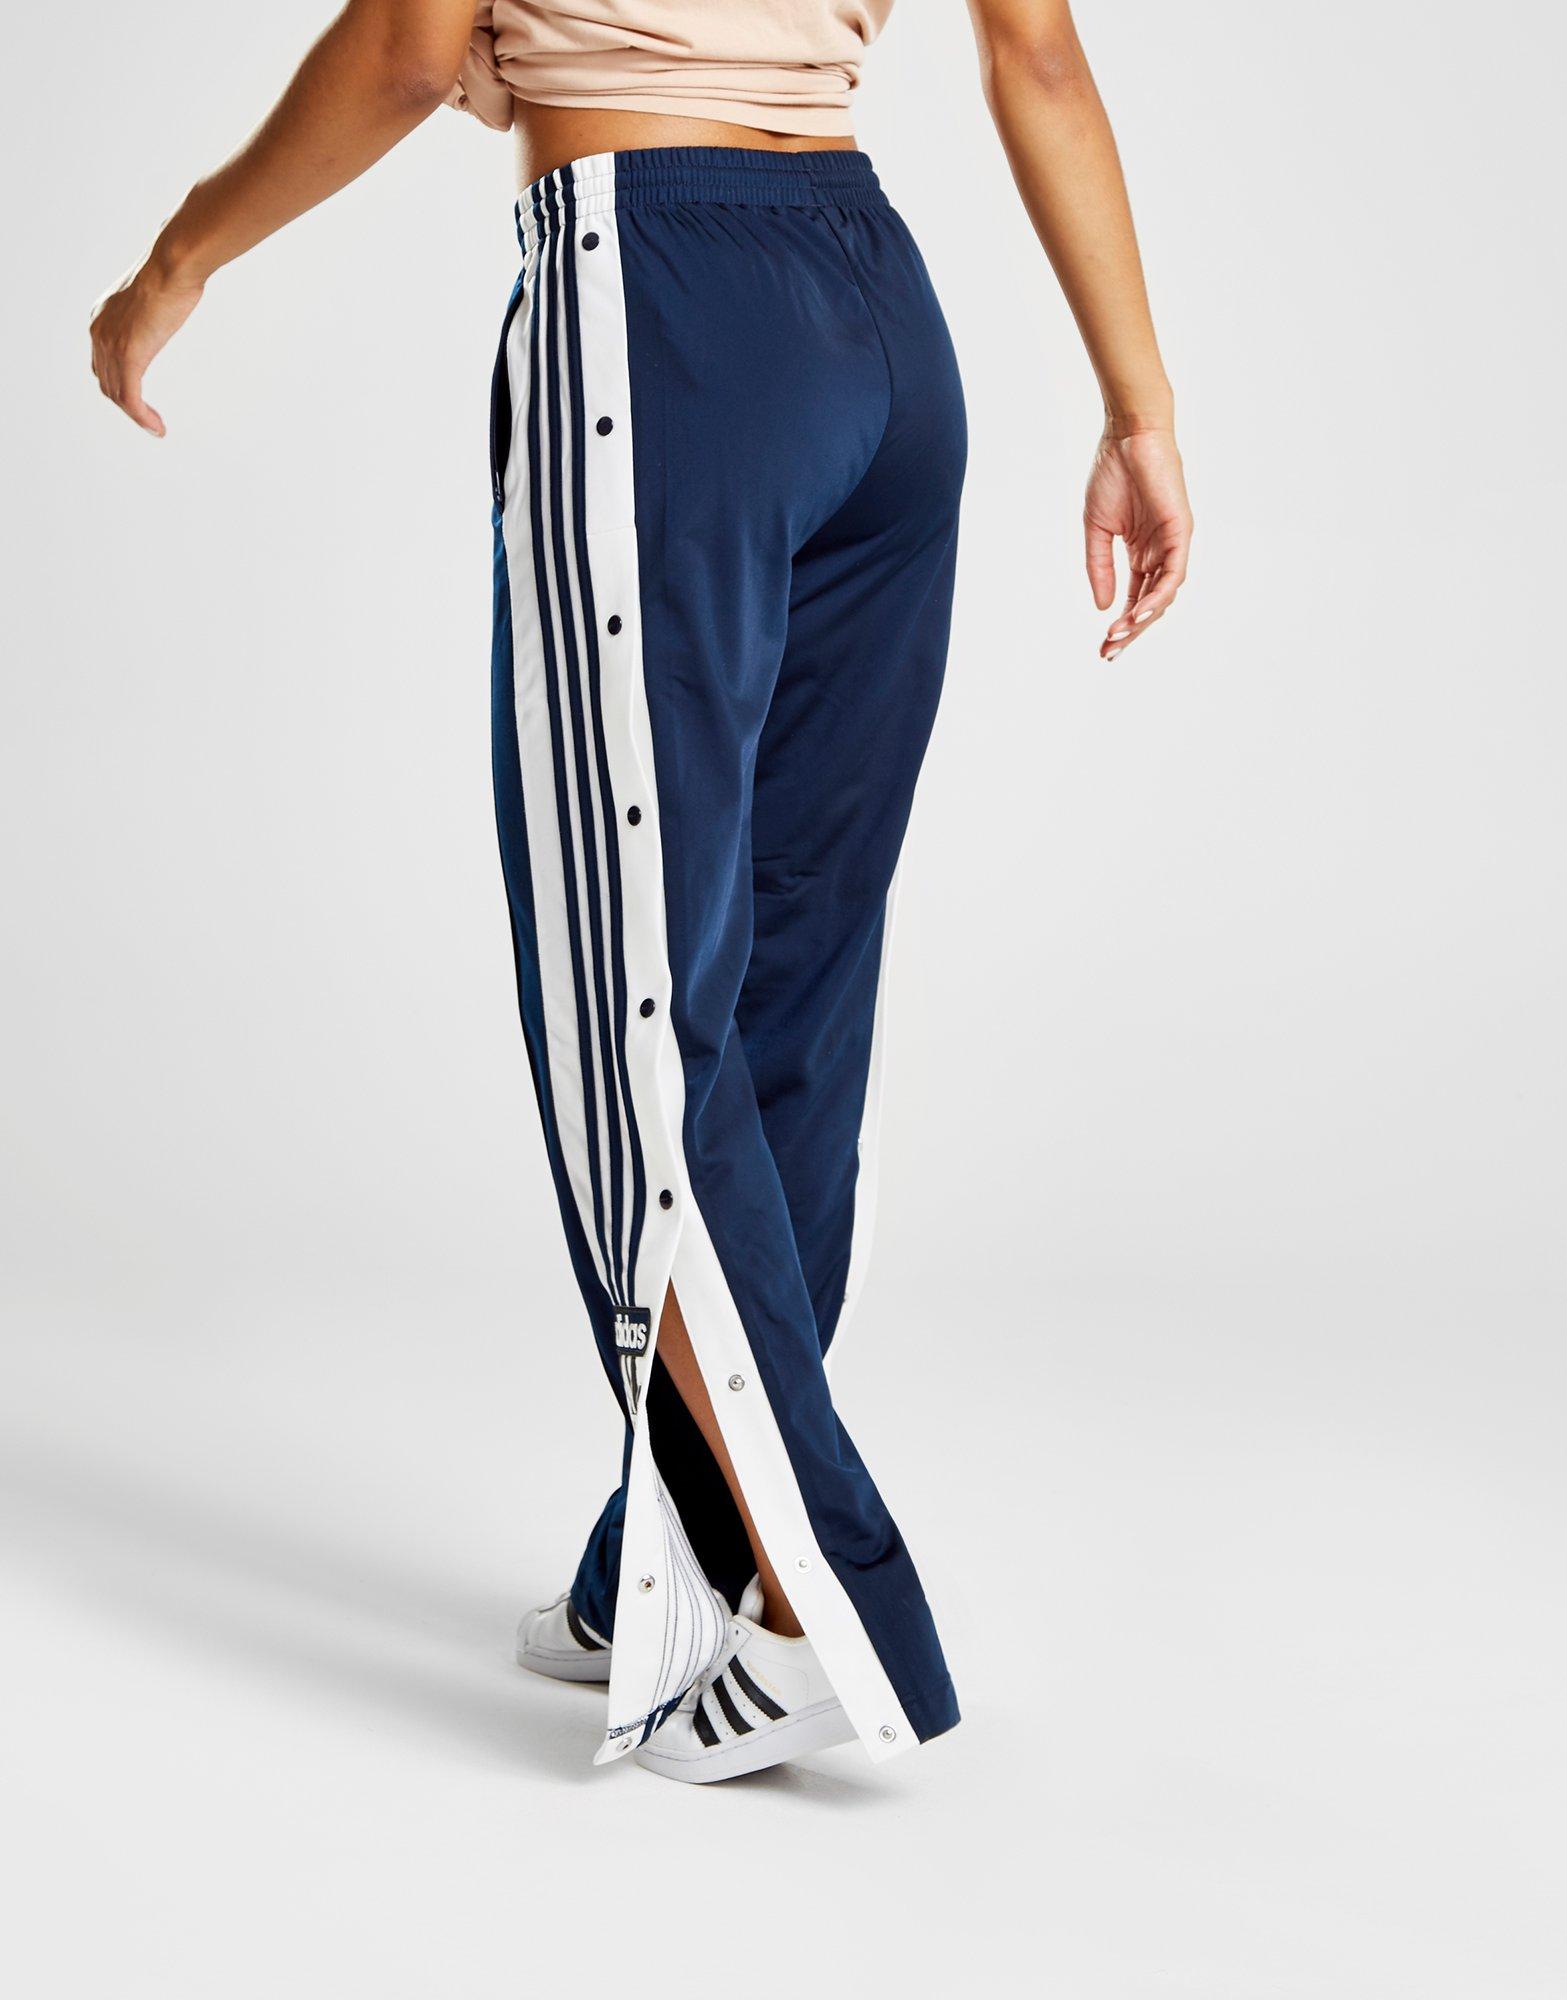 adidas poppers womens